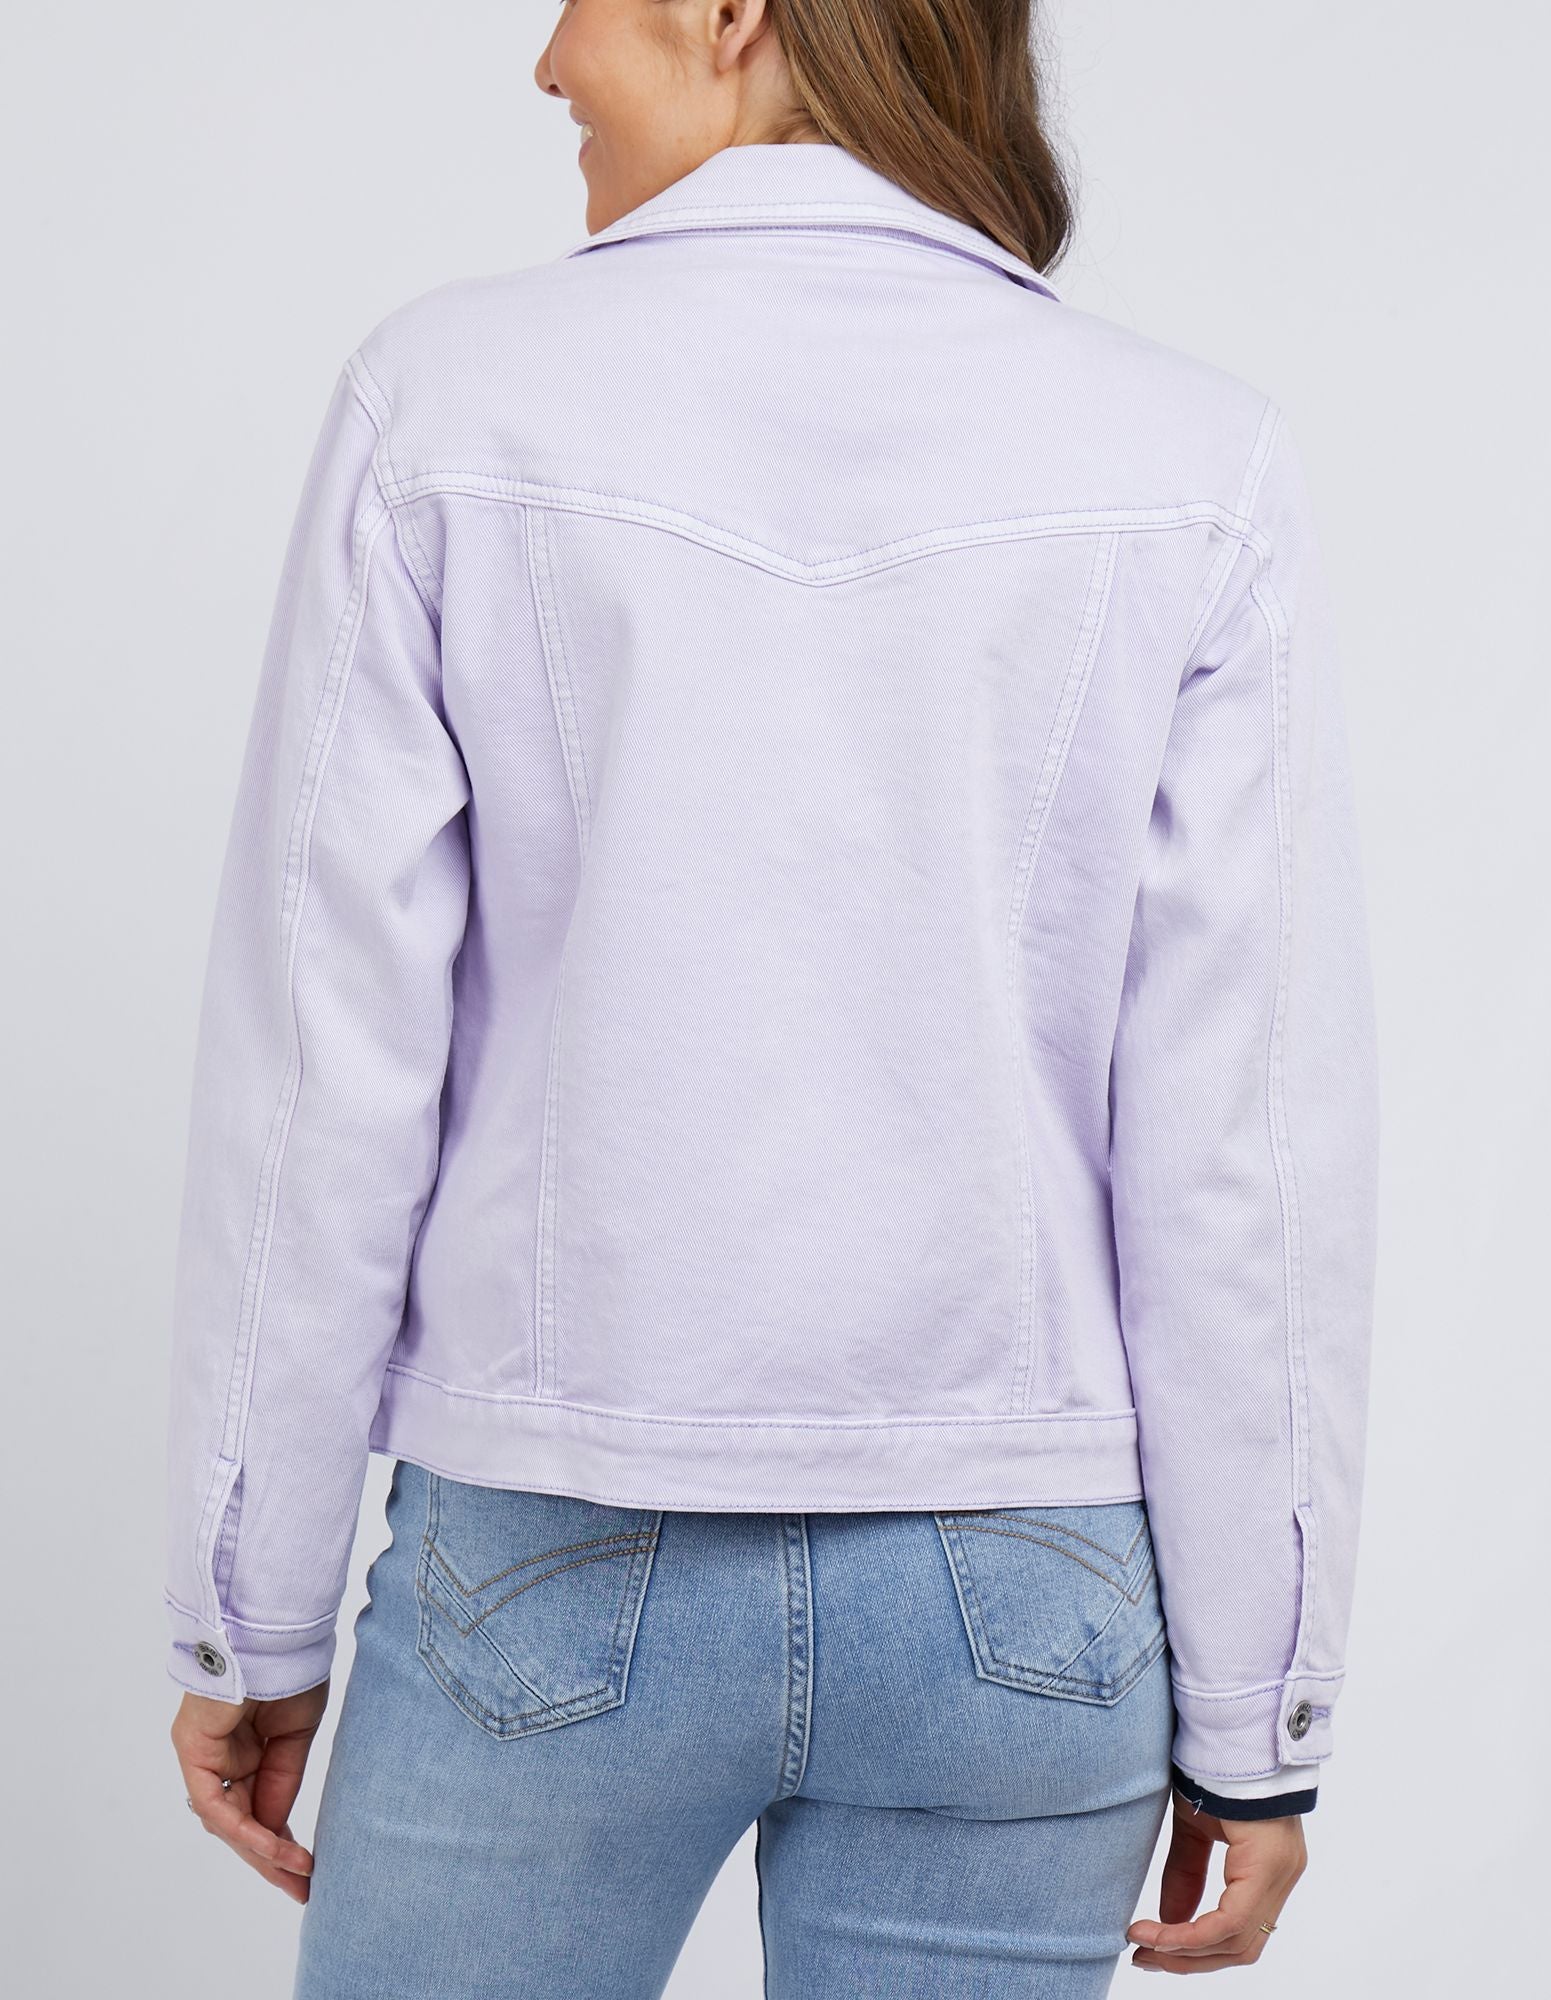 Tilly Jacket - Pastal Lilac - Elm Lifestyle - FUDGE Gifts Home Lifestyle